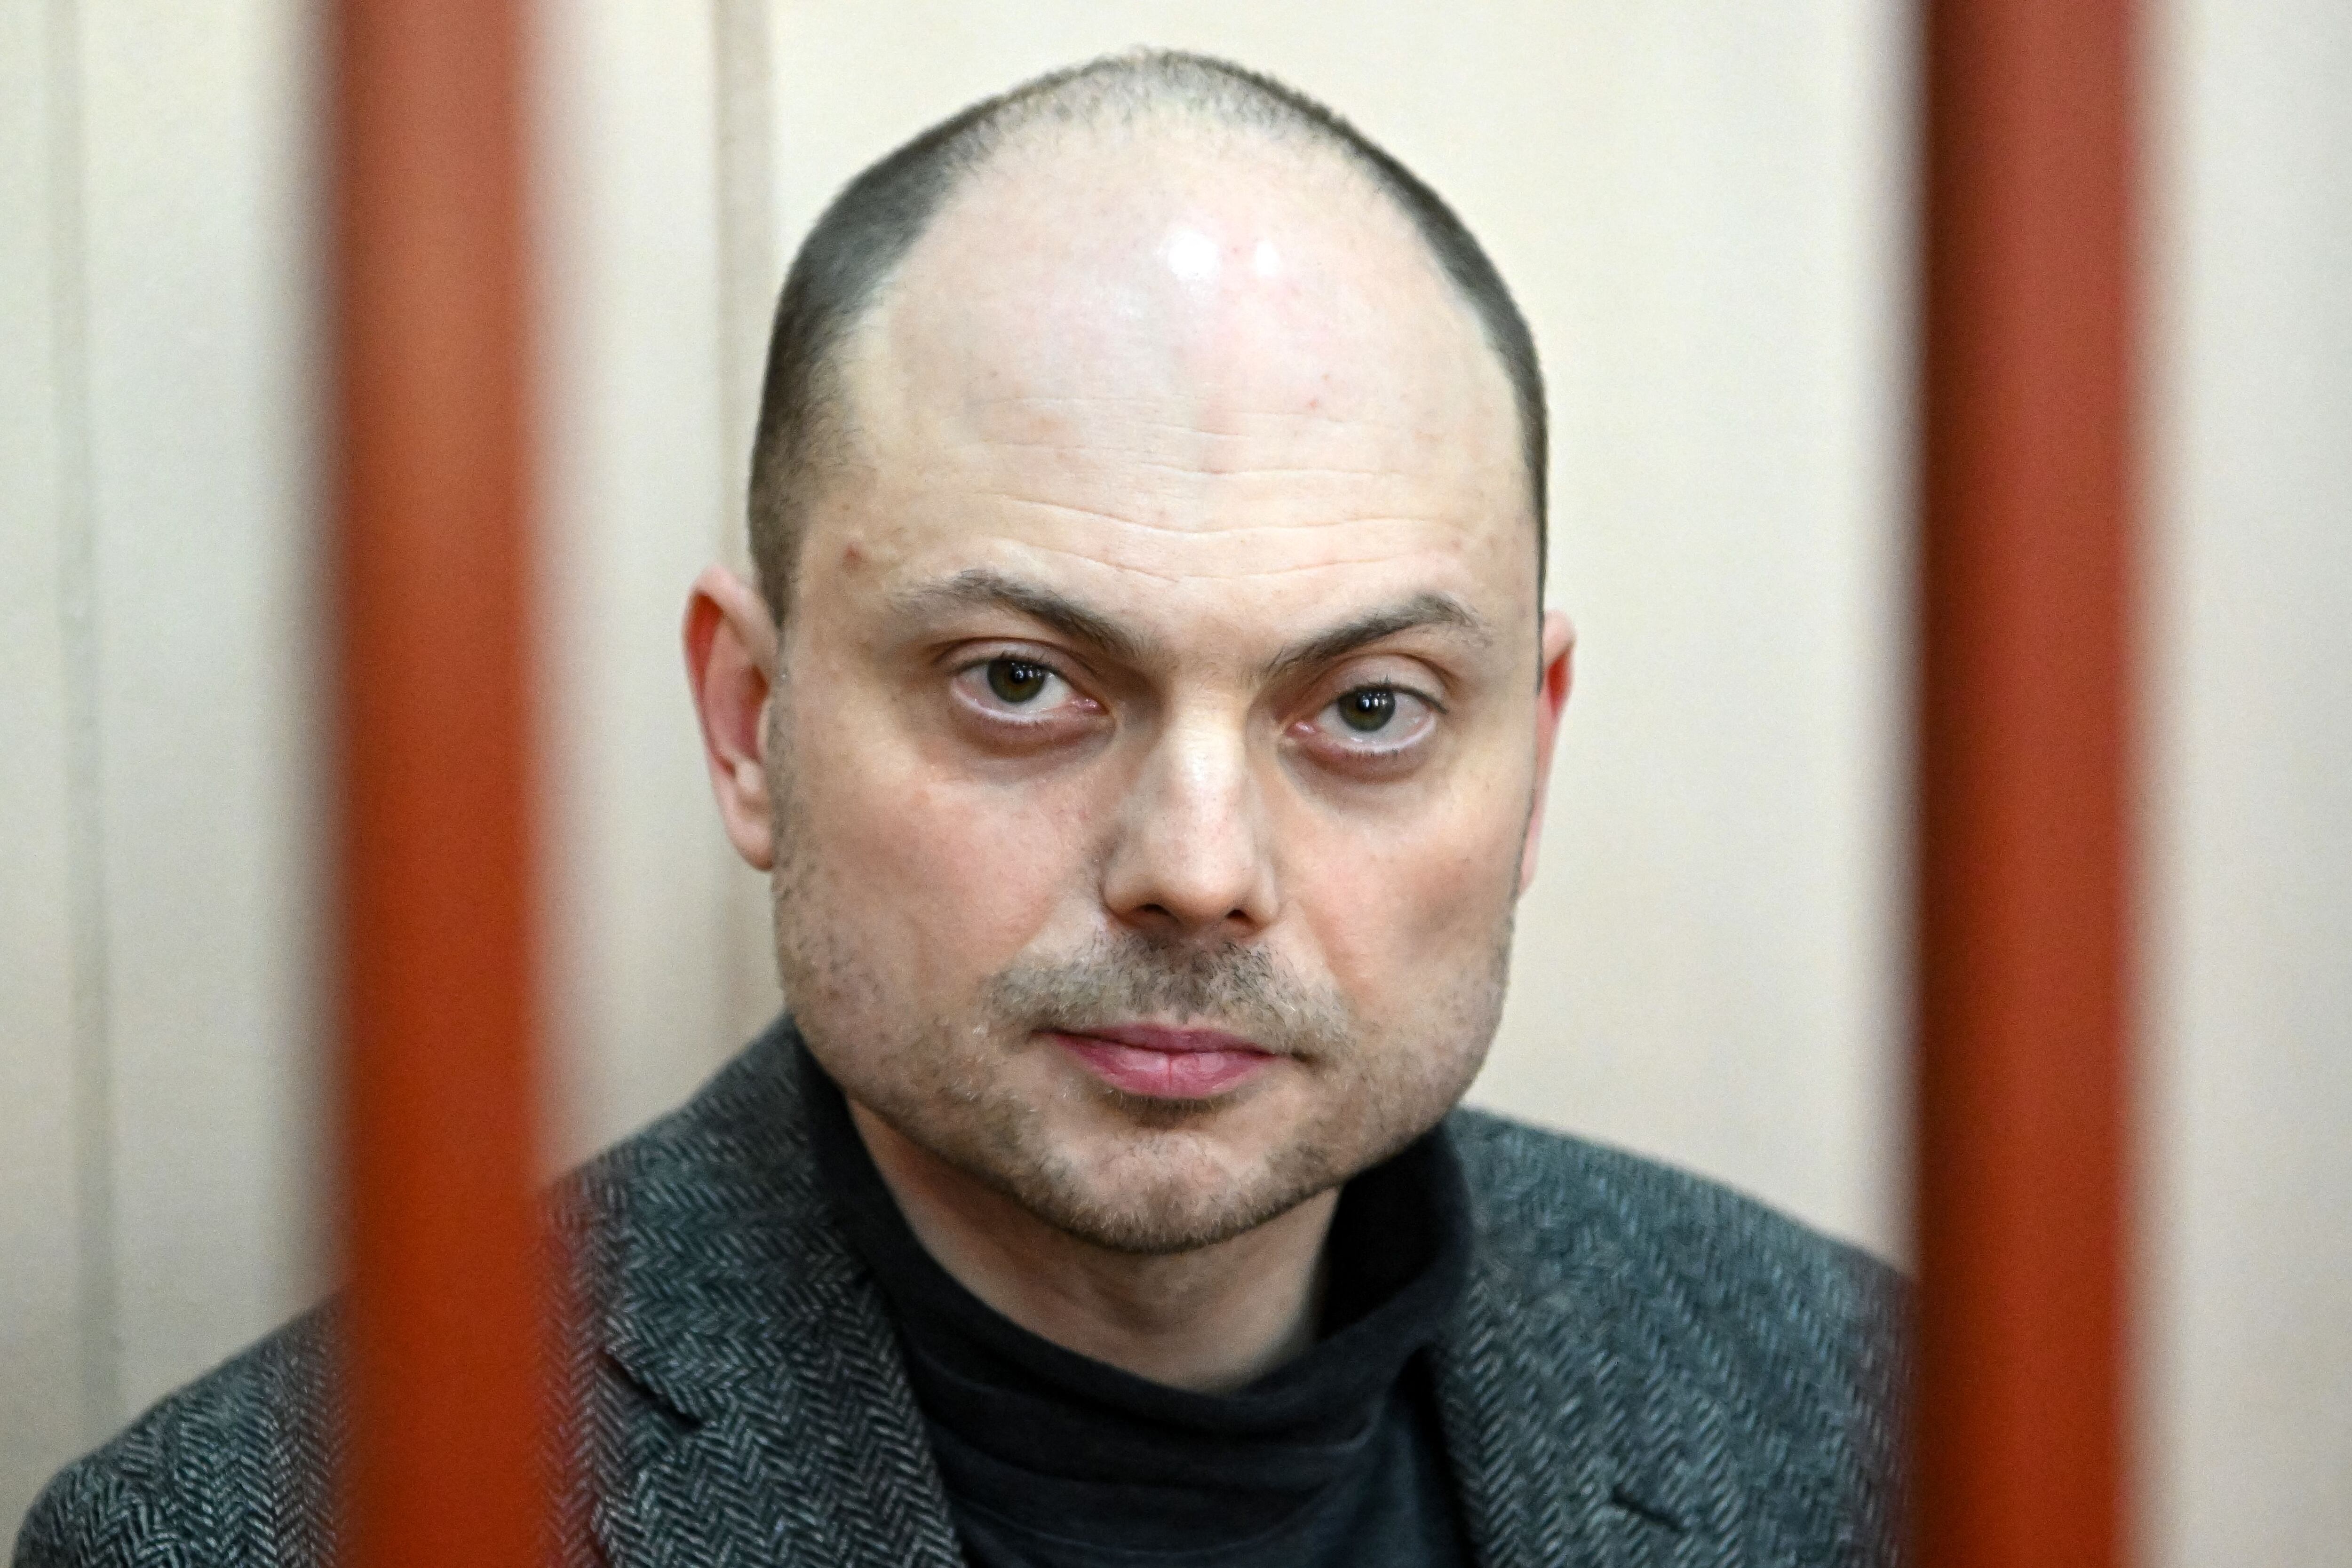 Russian opposition activist Vladimir Kara-Murza sits on a bench inside the defendants' cage during a hearing at the Basmanny court in Moscow on October 10, 2022. (Photo by NATALIA KOLESNIKOVA/AFP).